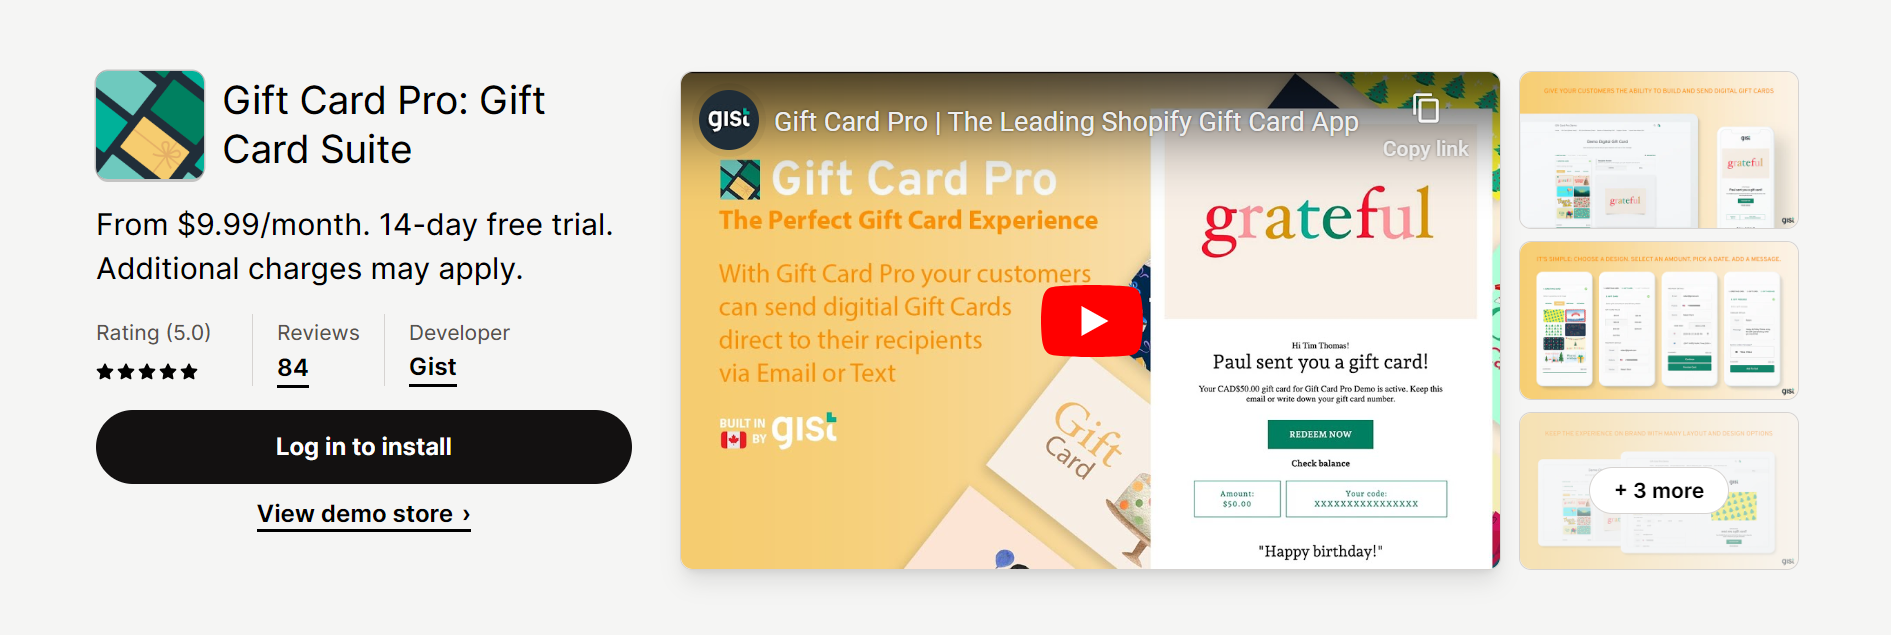 Gift Card Pro: Gift Card Suite